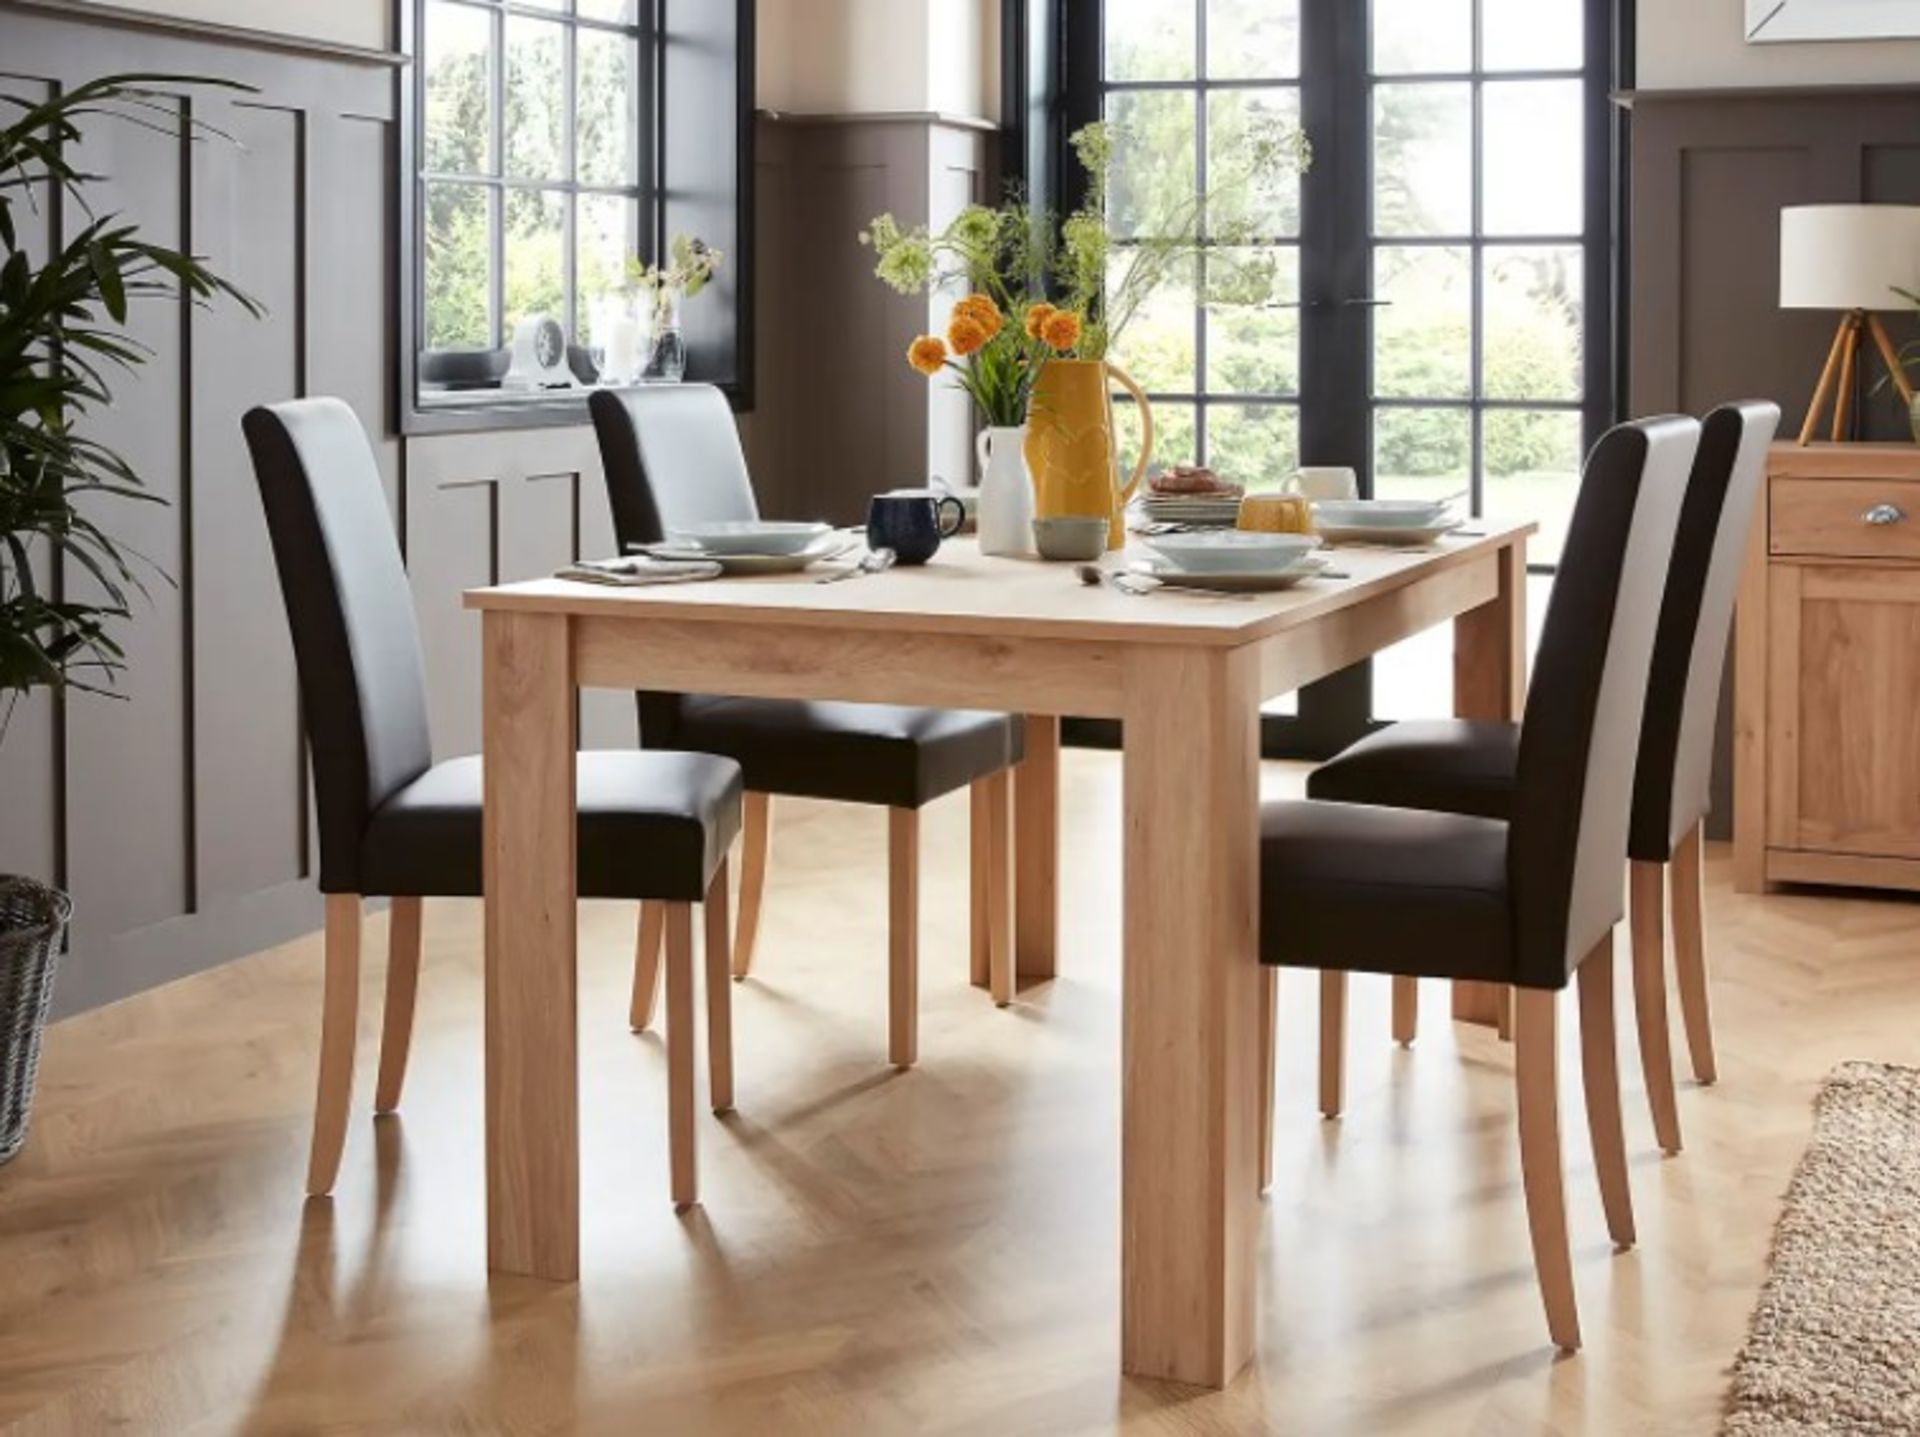 (P14) 1x Marcy Dining Table Oak RRP £150. (L)150 x (W)90 x (H)76.5cm. 6 Seater Table.